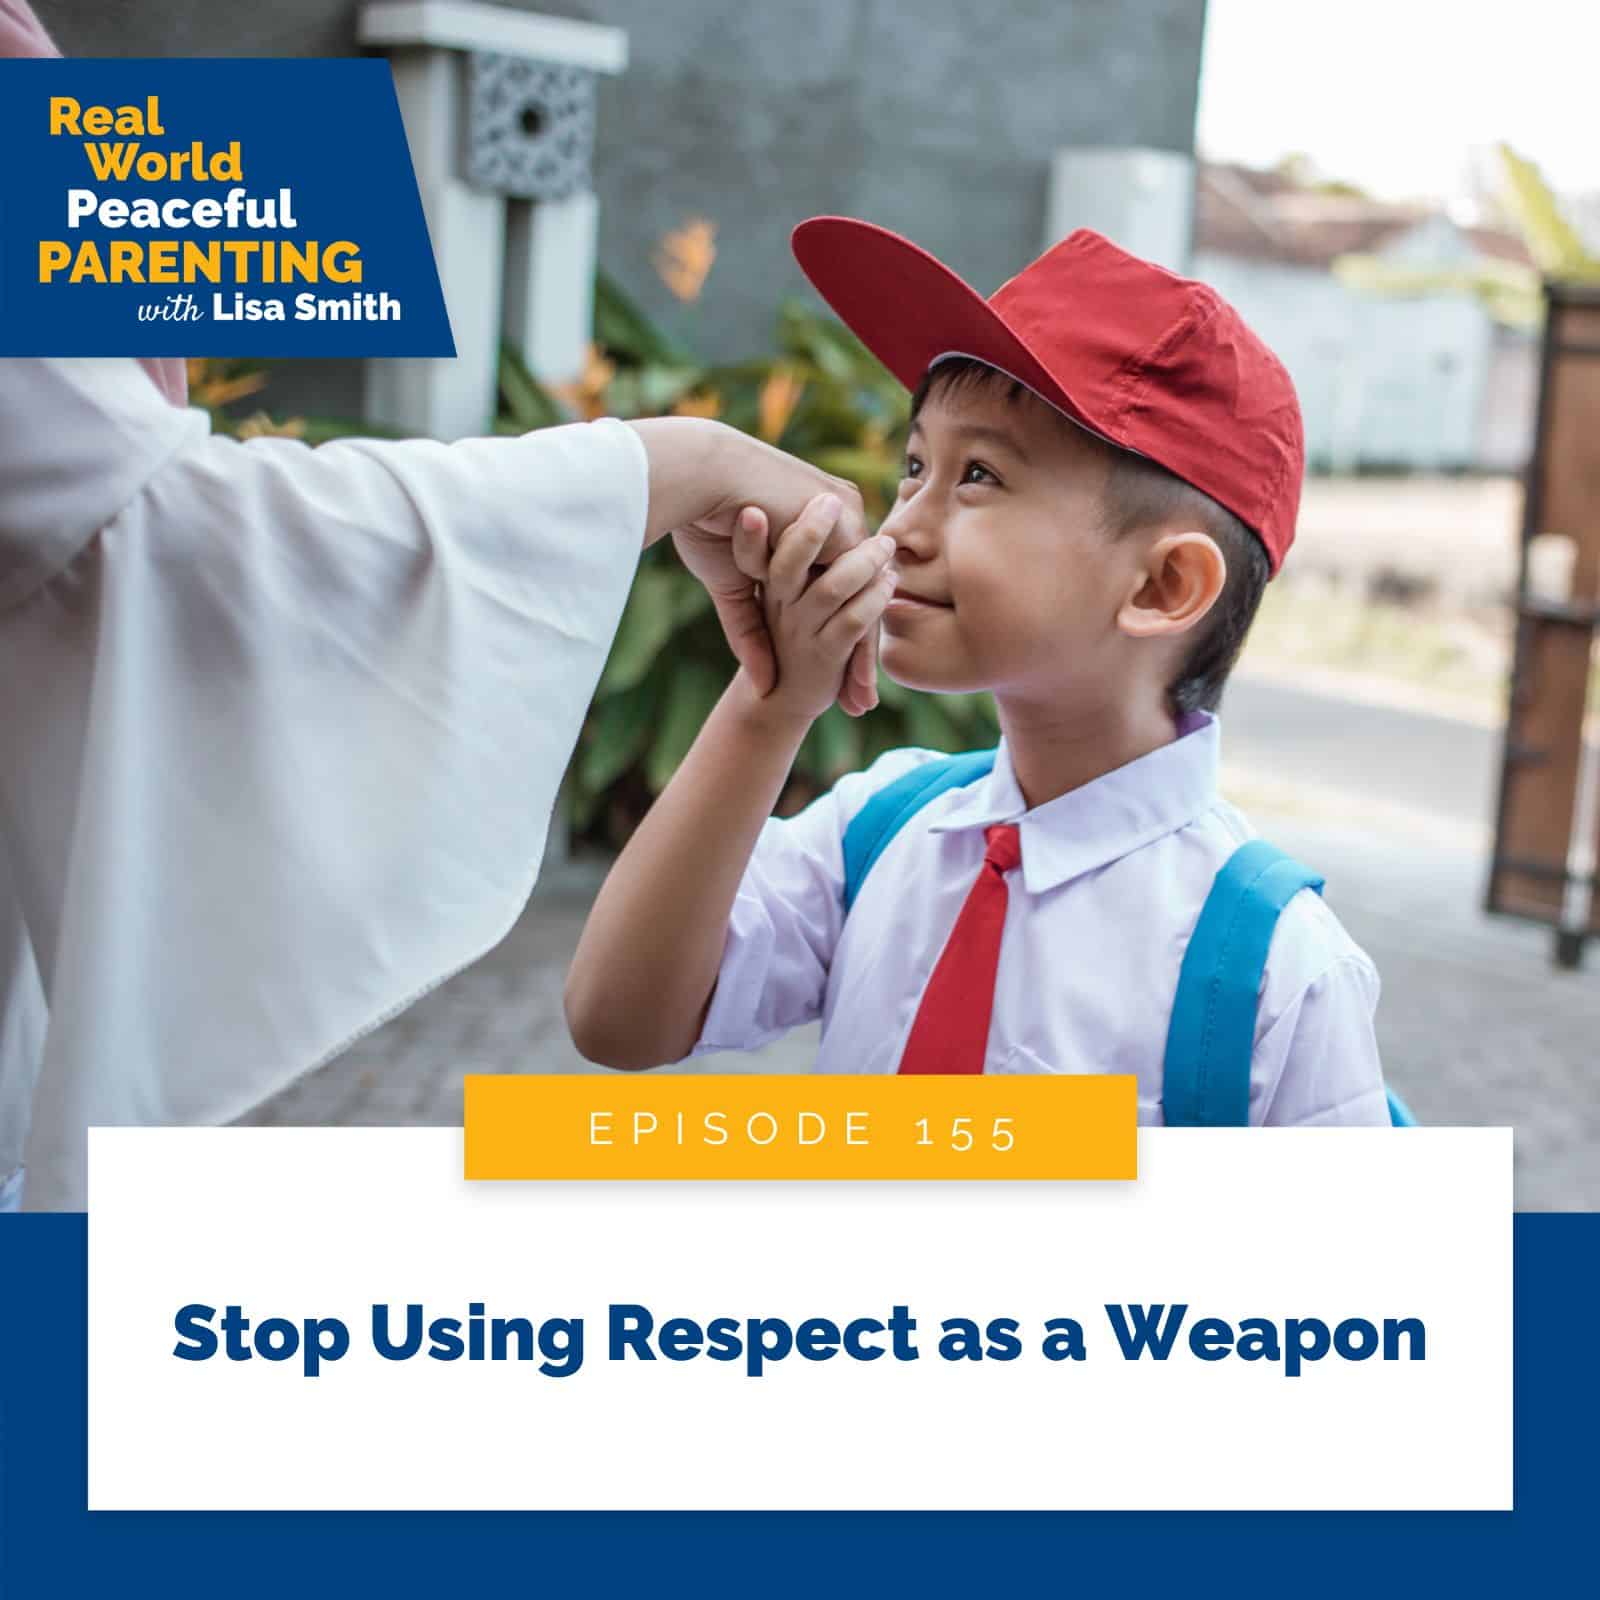 Real World Peaceful Parenting with Lisa Smith | Stop Using Respect as a Weapon